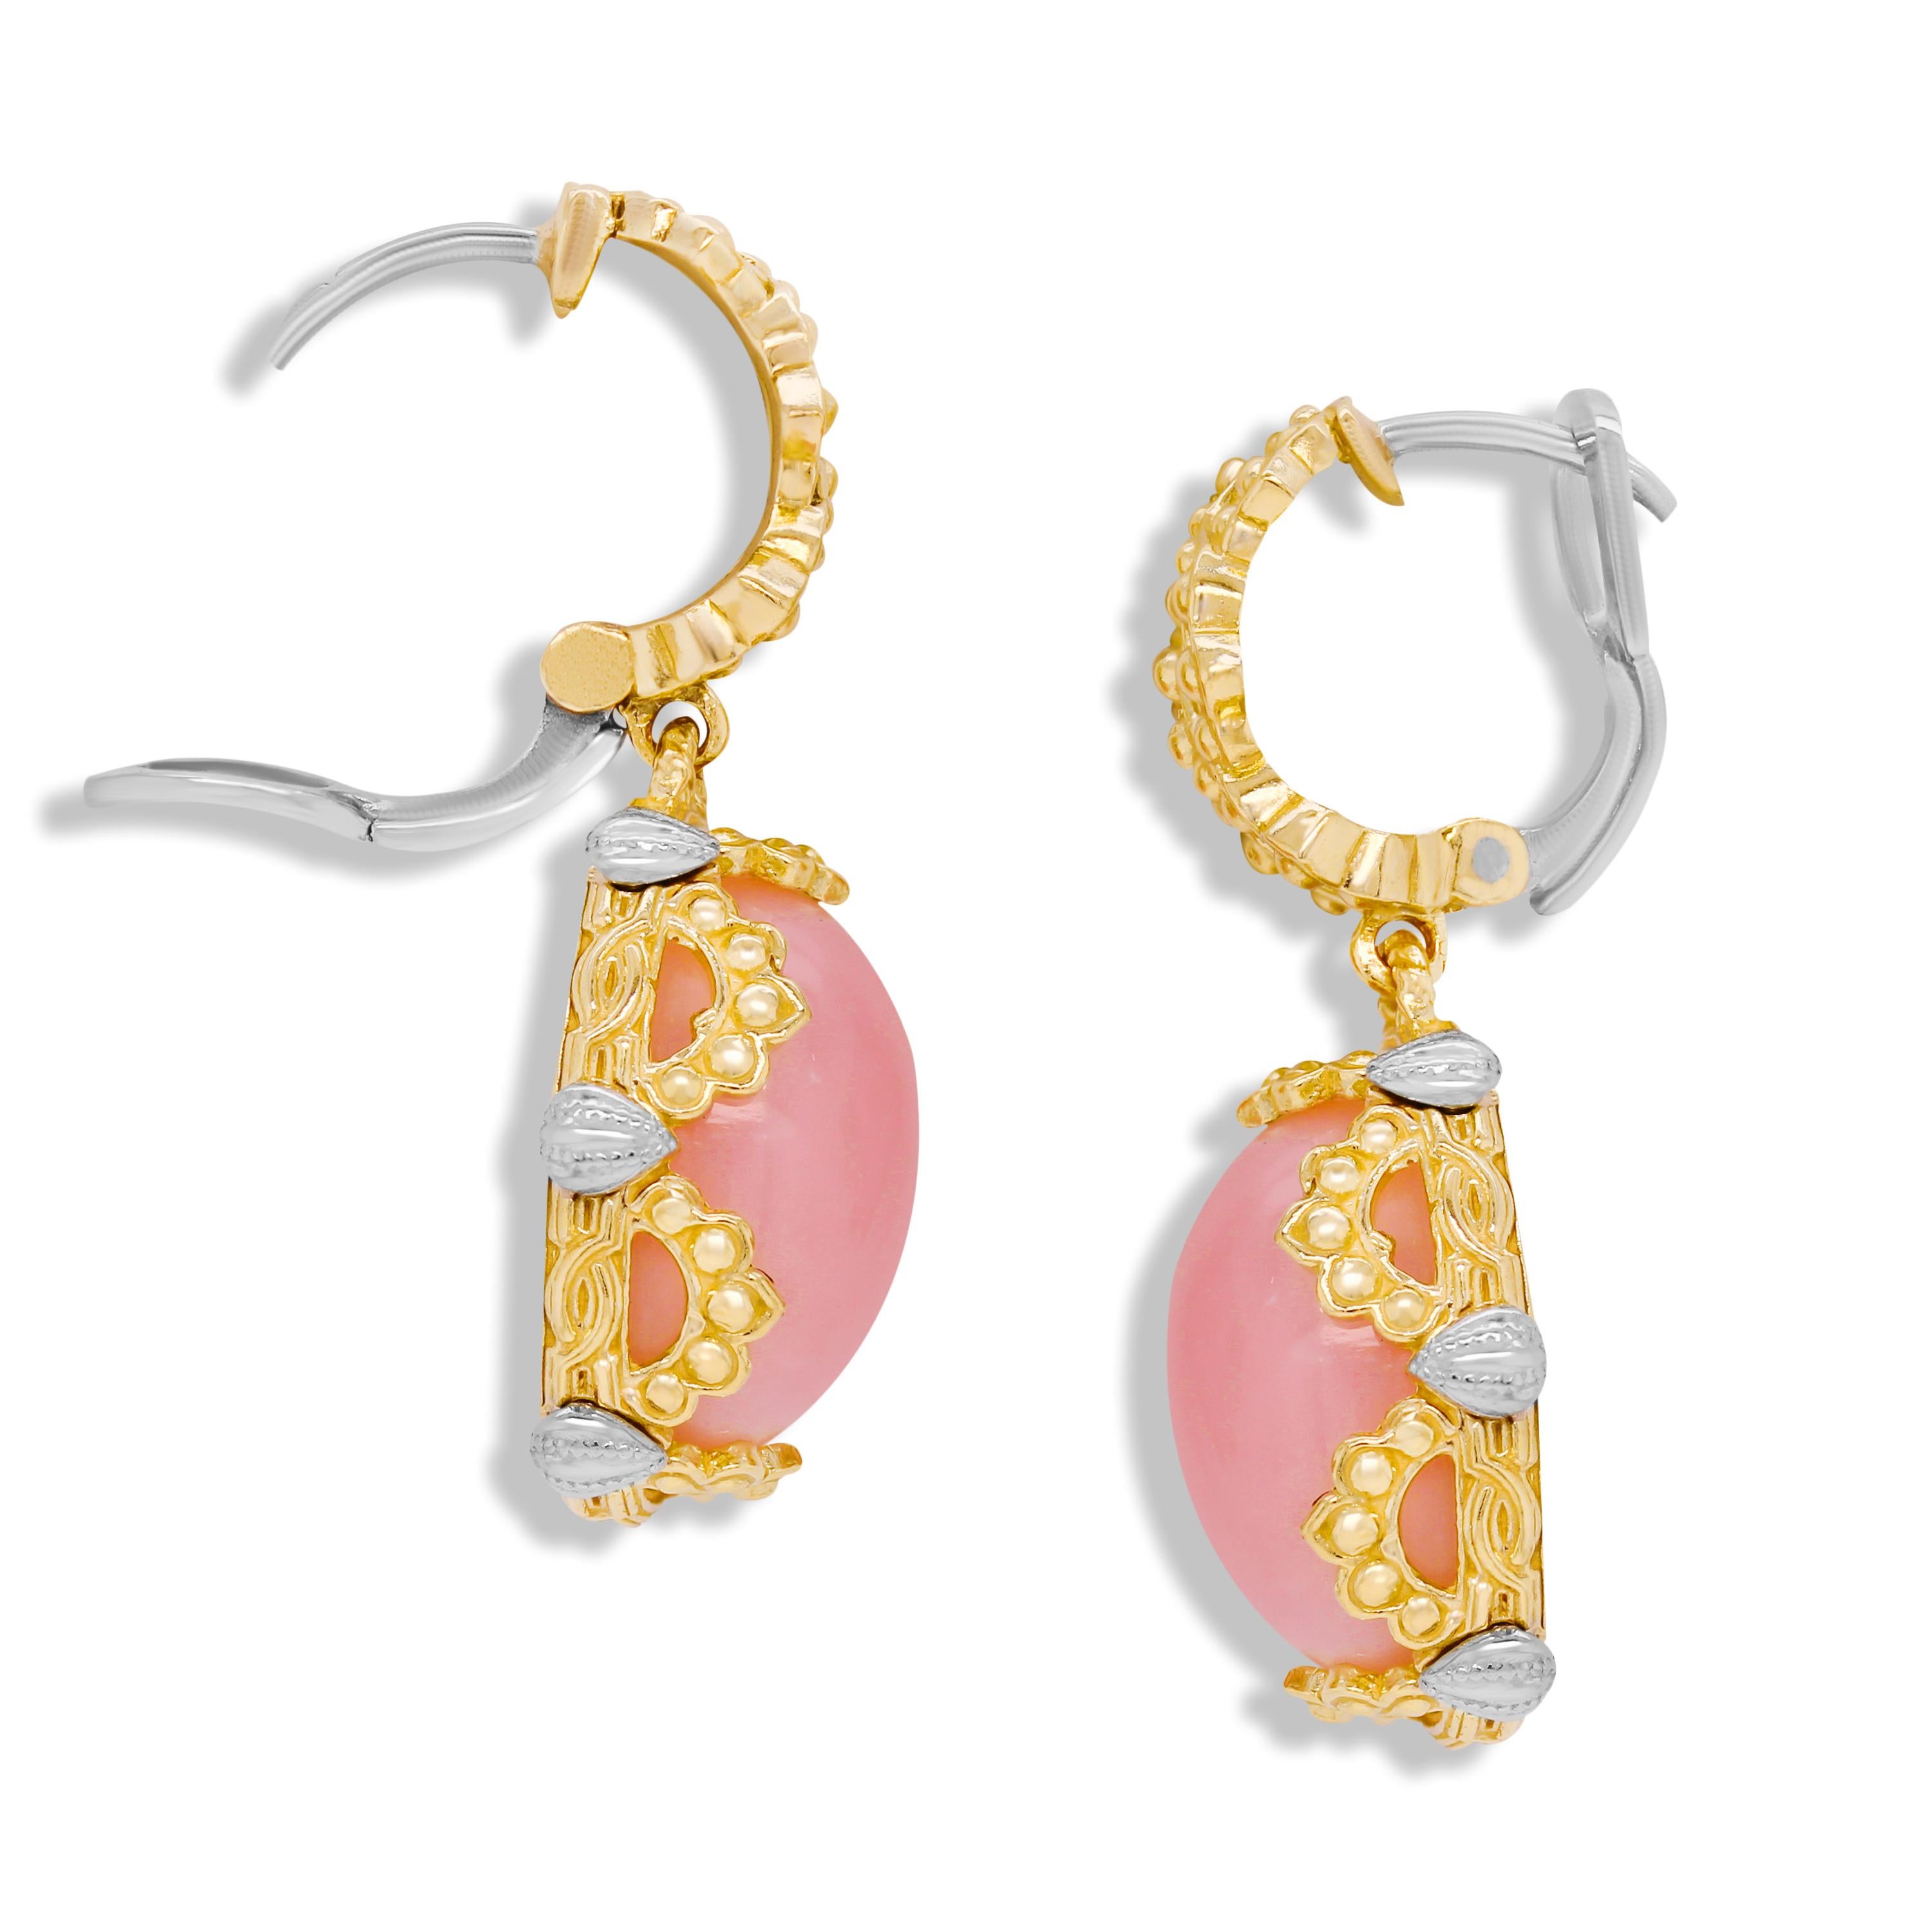 Stambolian 18K Two Tone Gold Pink Peruvian Opal Drop Earrings

This special pair of earrings feature two oval, Pink Peruvian Opal centers

Earrings measure 1.20 inch in length by 0.53 inch width

French backs used and allow the earrings to sit